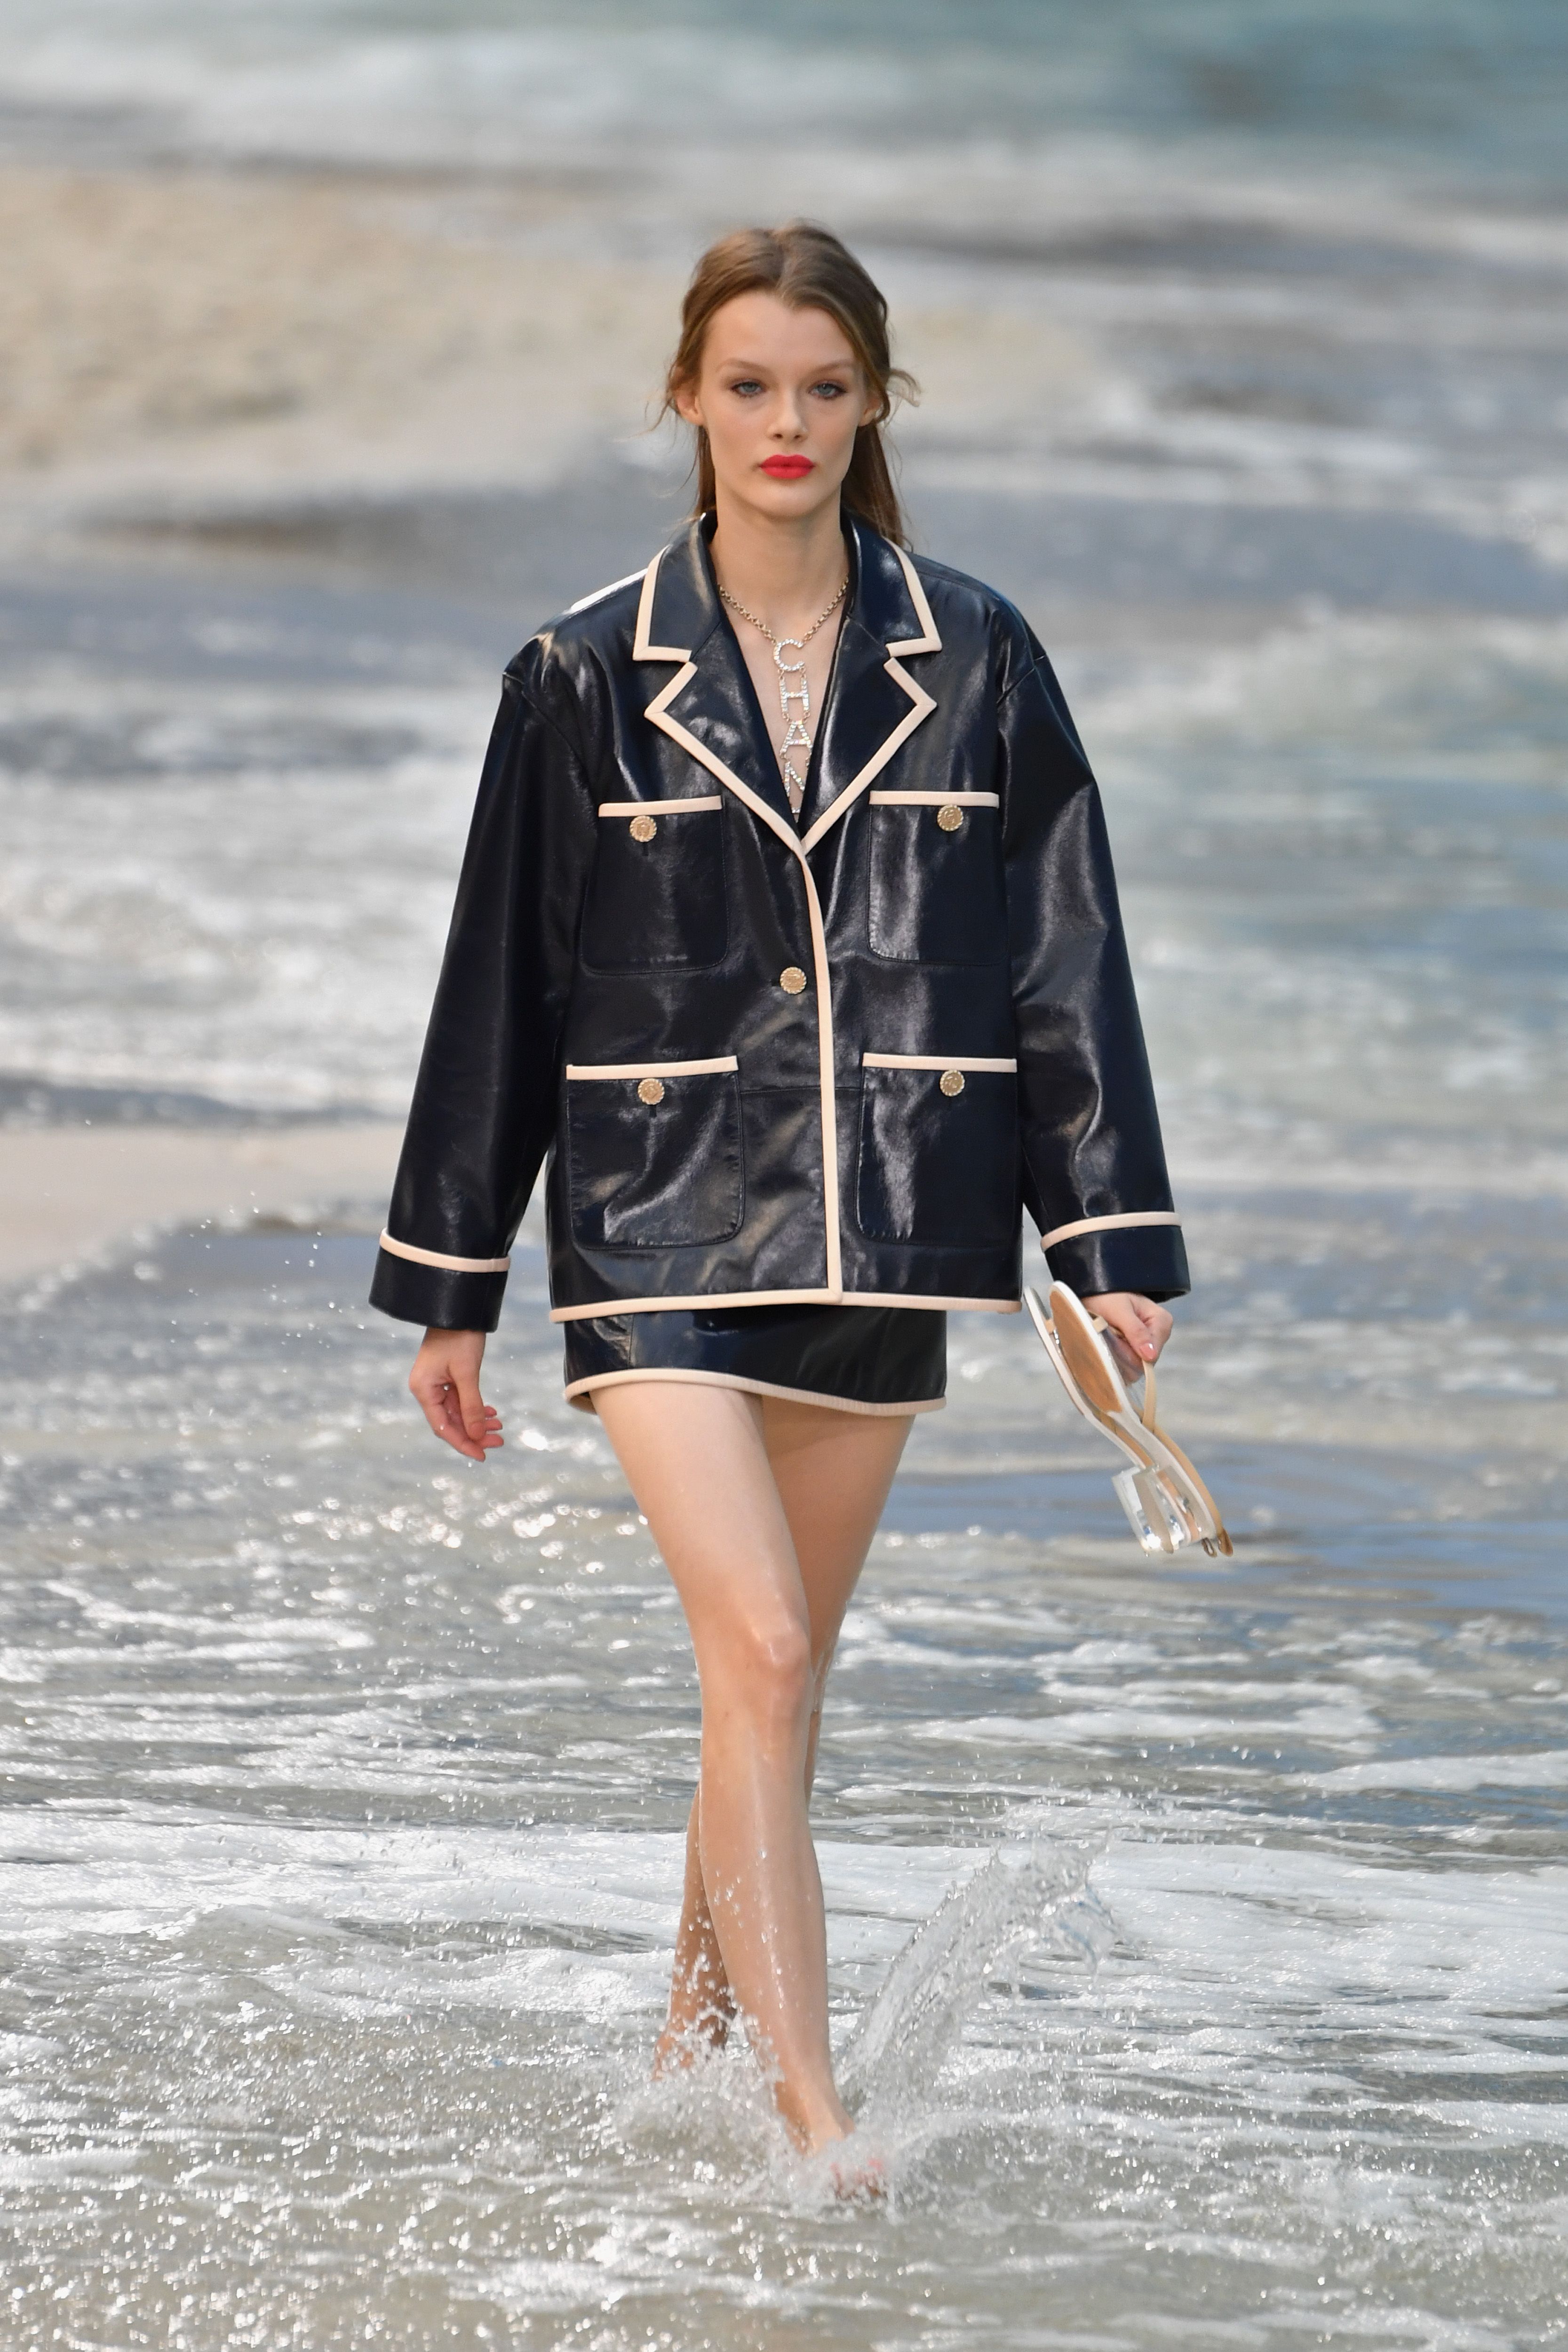 Chanel Spring 2019 Ready-to-Wear Collection